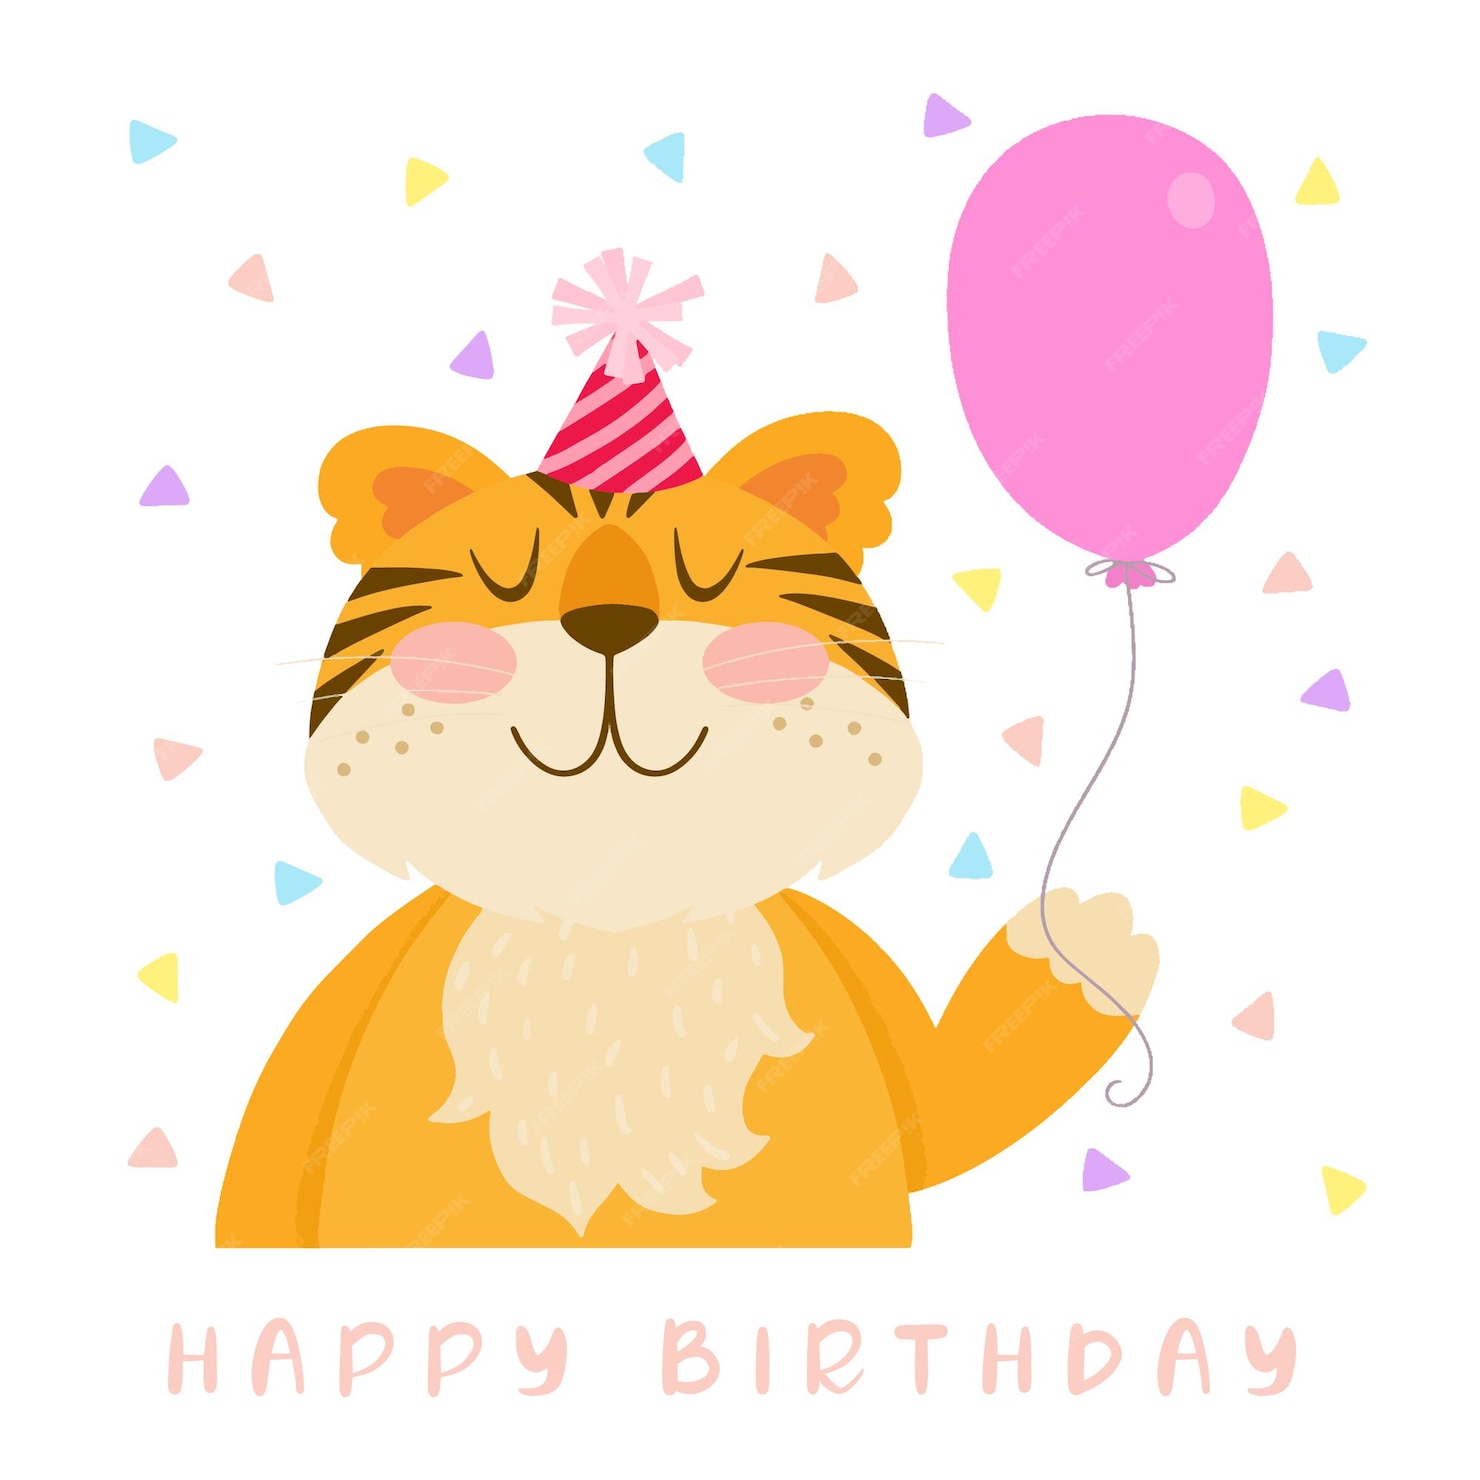 Premium Vector | Happy birthday card funny little tiger with balloon